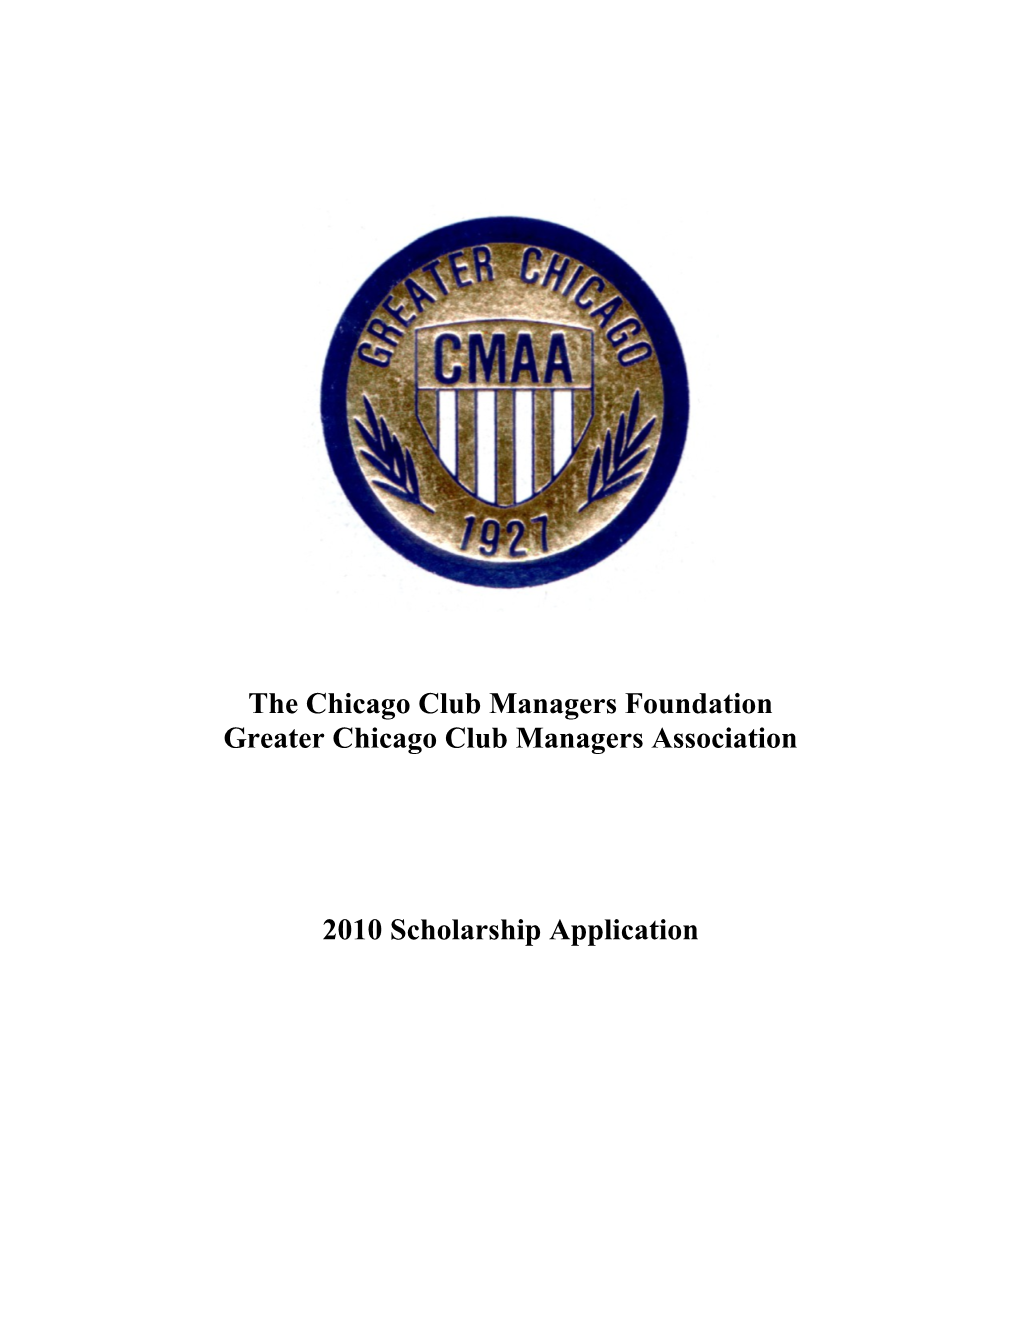 The Chicago Club Managers Foundation